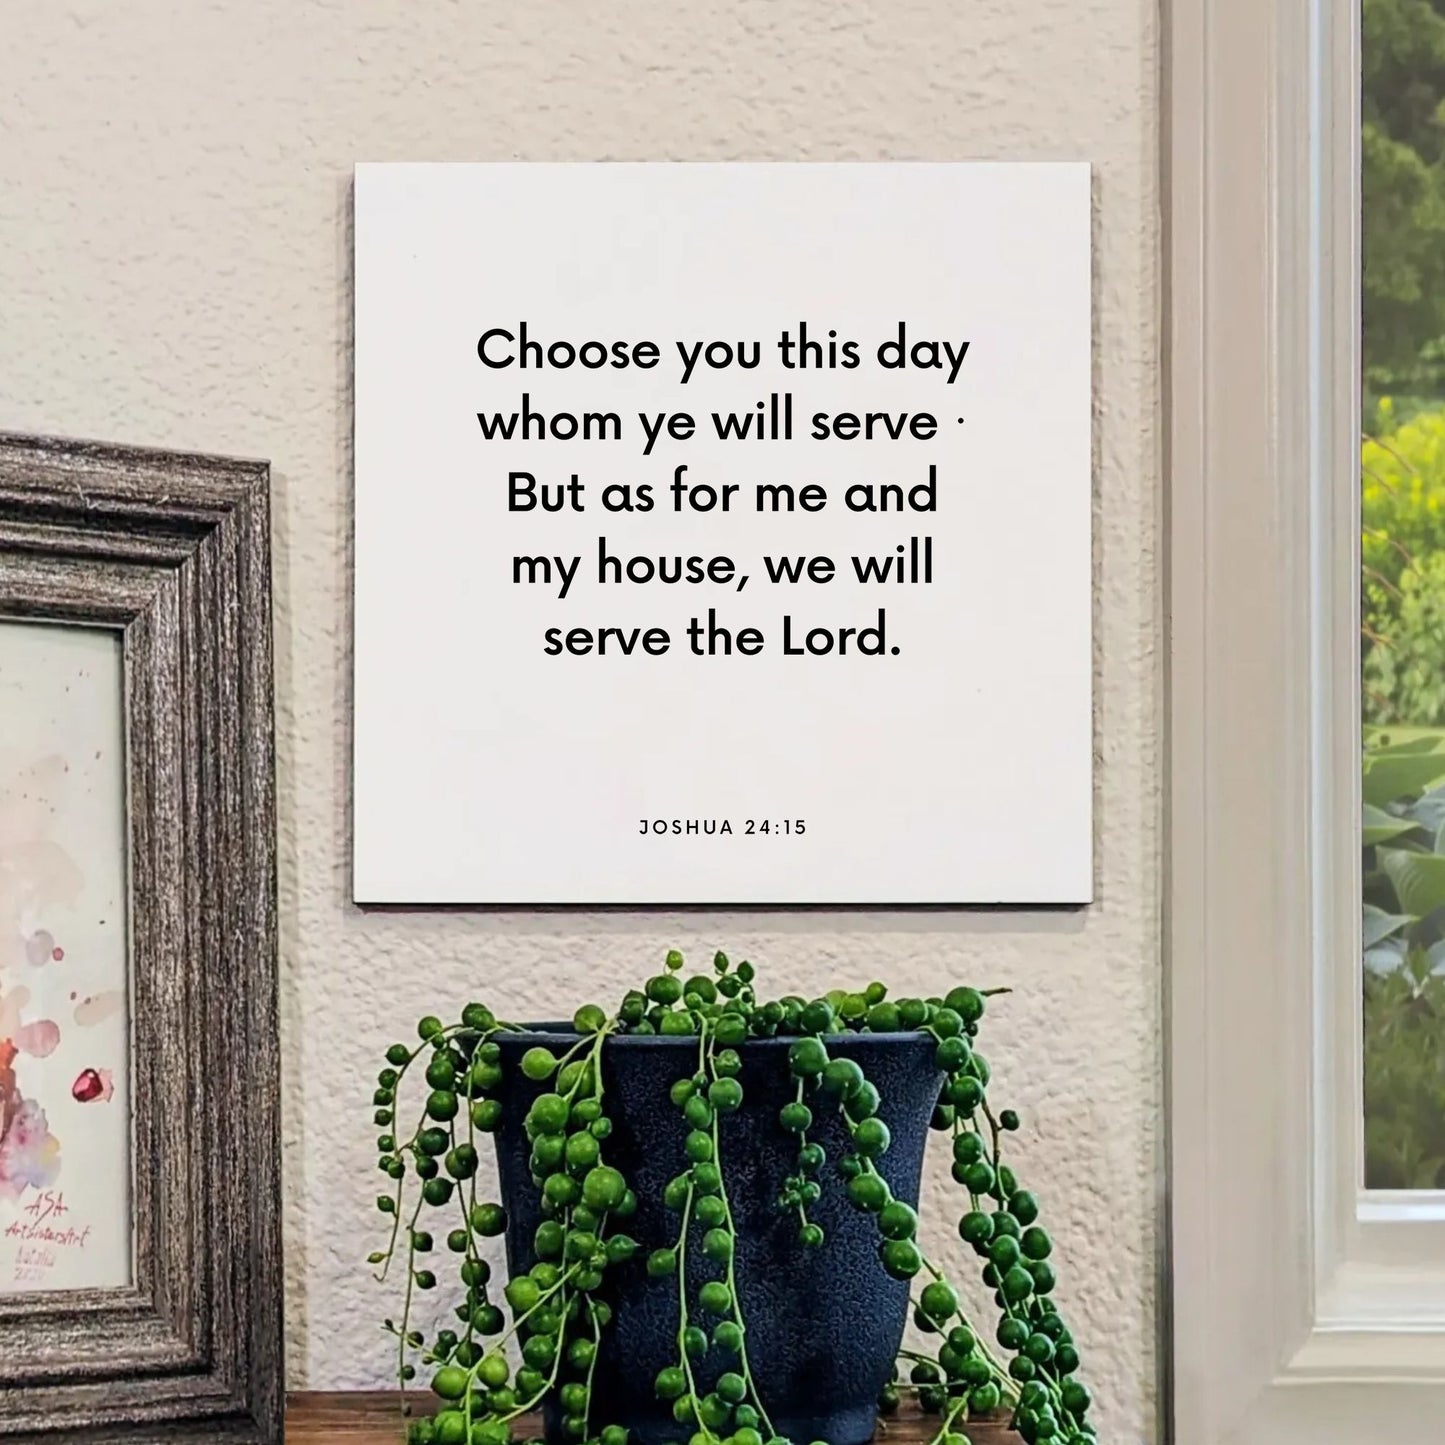 Window mouting of the scripture tile for Joshua 24:15 - "Choose you this day whom ye will serve"